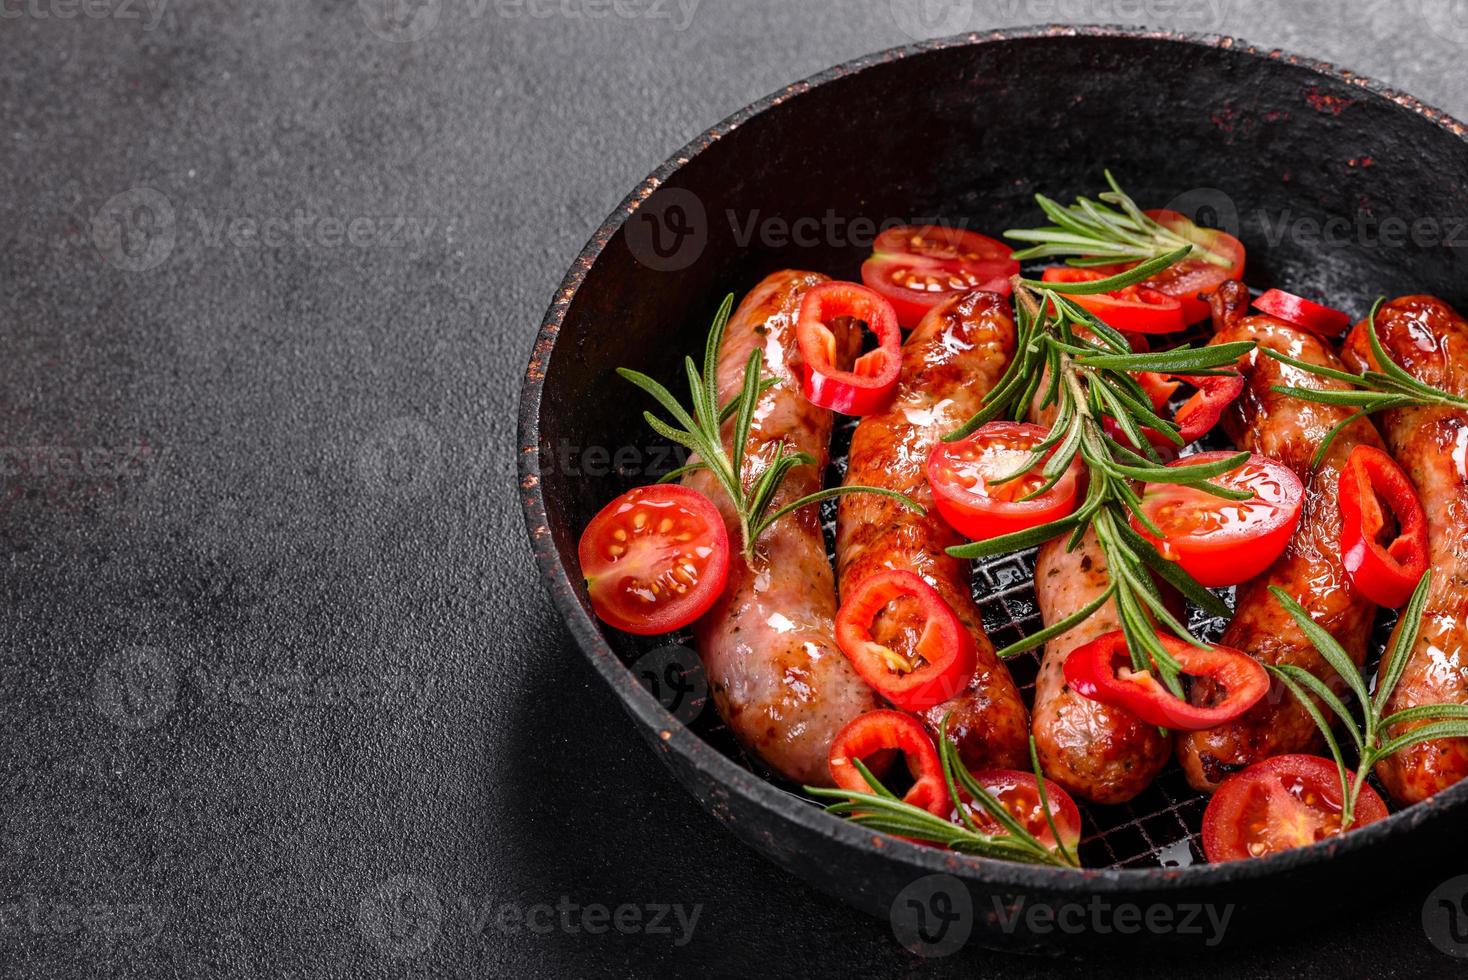 Grilled sausages with vegetables and spices on black background photo